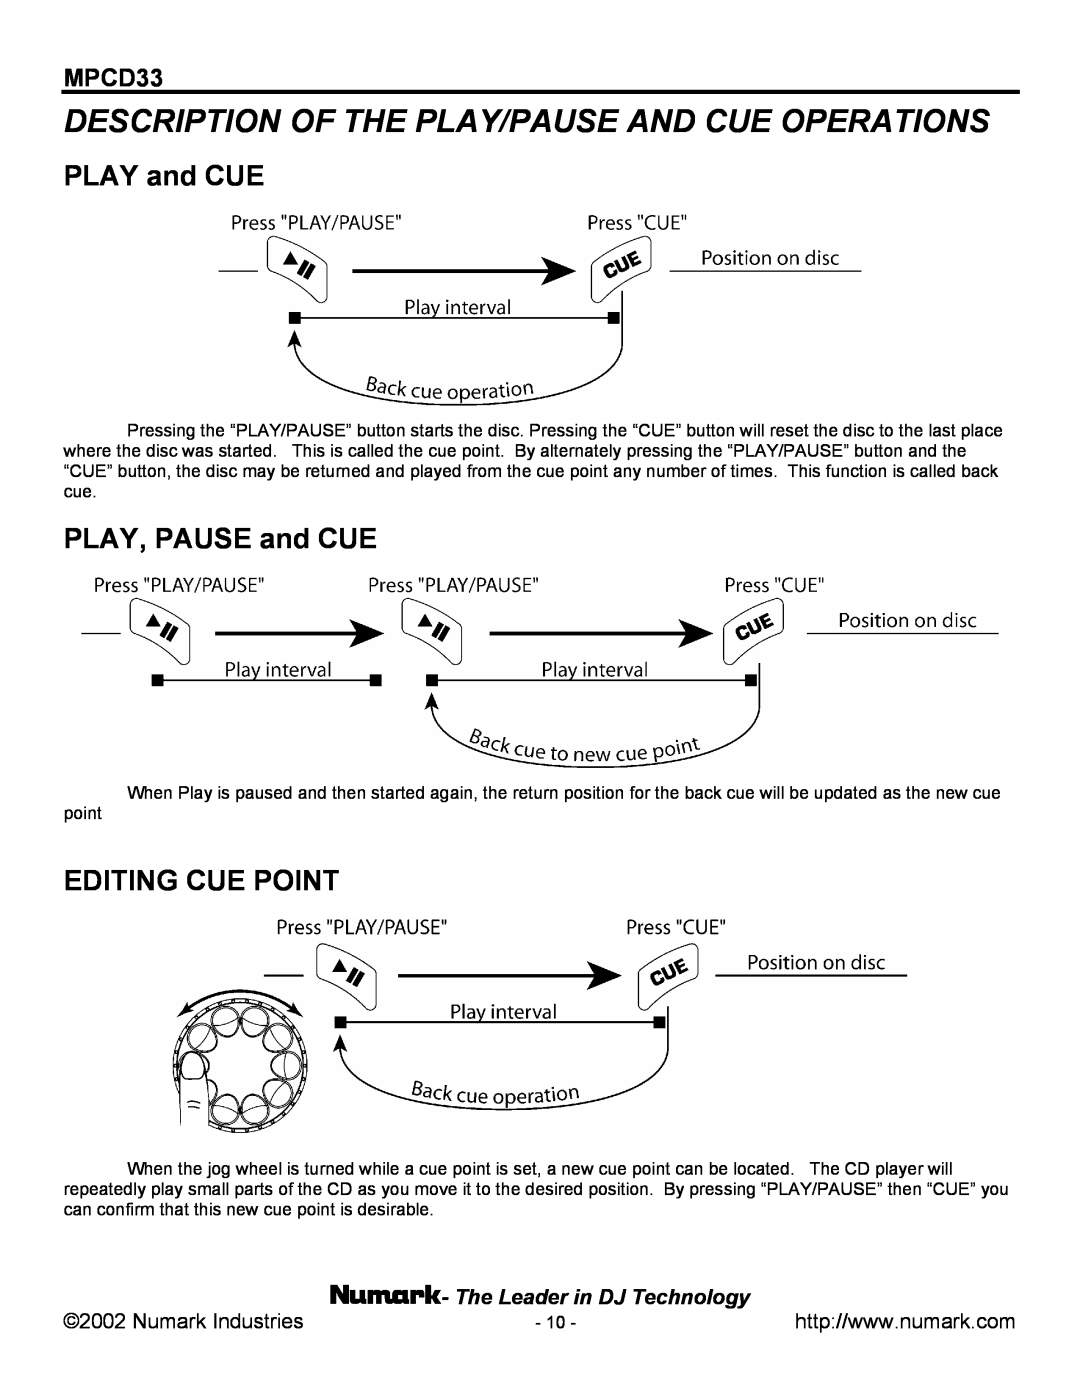 Numark Industries MPCD33 manual Description Of The Play/Pause And Cue Operations, PLAY and CUE, PLAY, PAUSE and CUE 